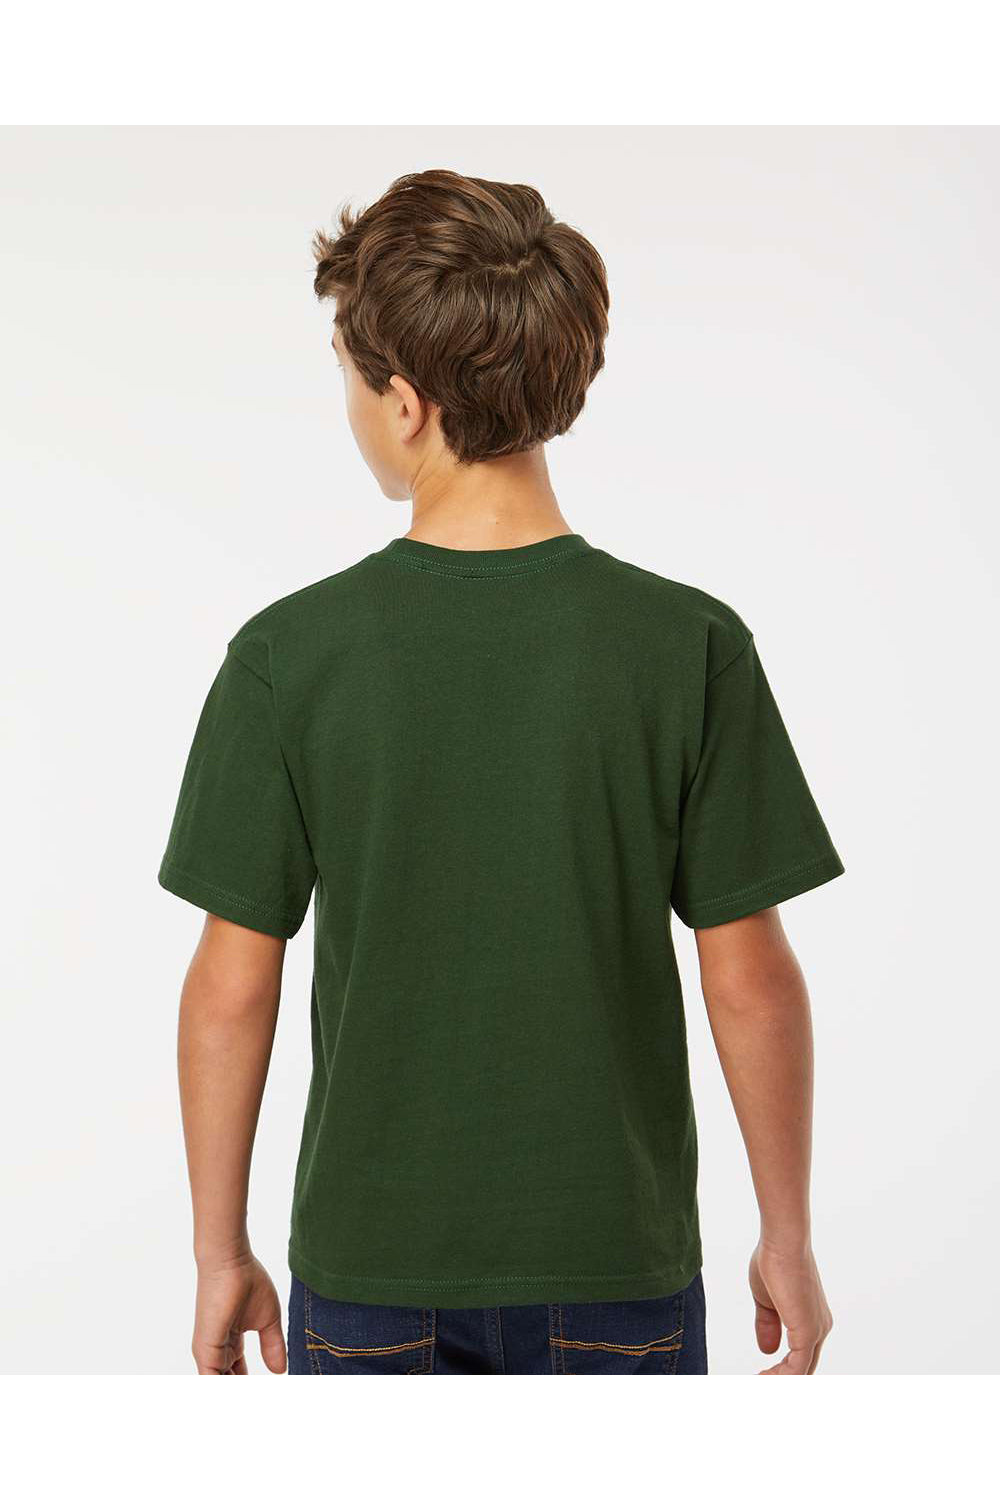 M&O 4850 Youth Gold Soft Touch Short Sleeve Crewneck T-Shirt Forest Green Model Back